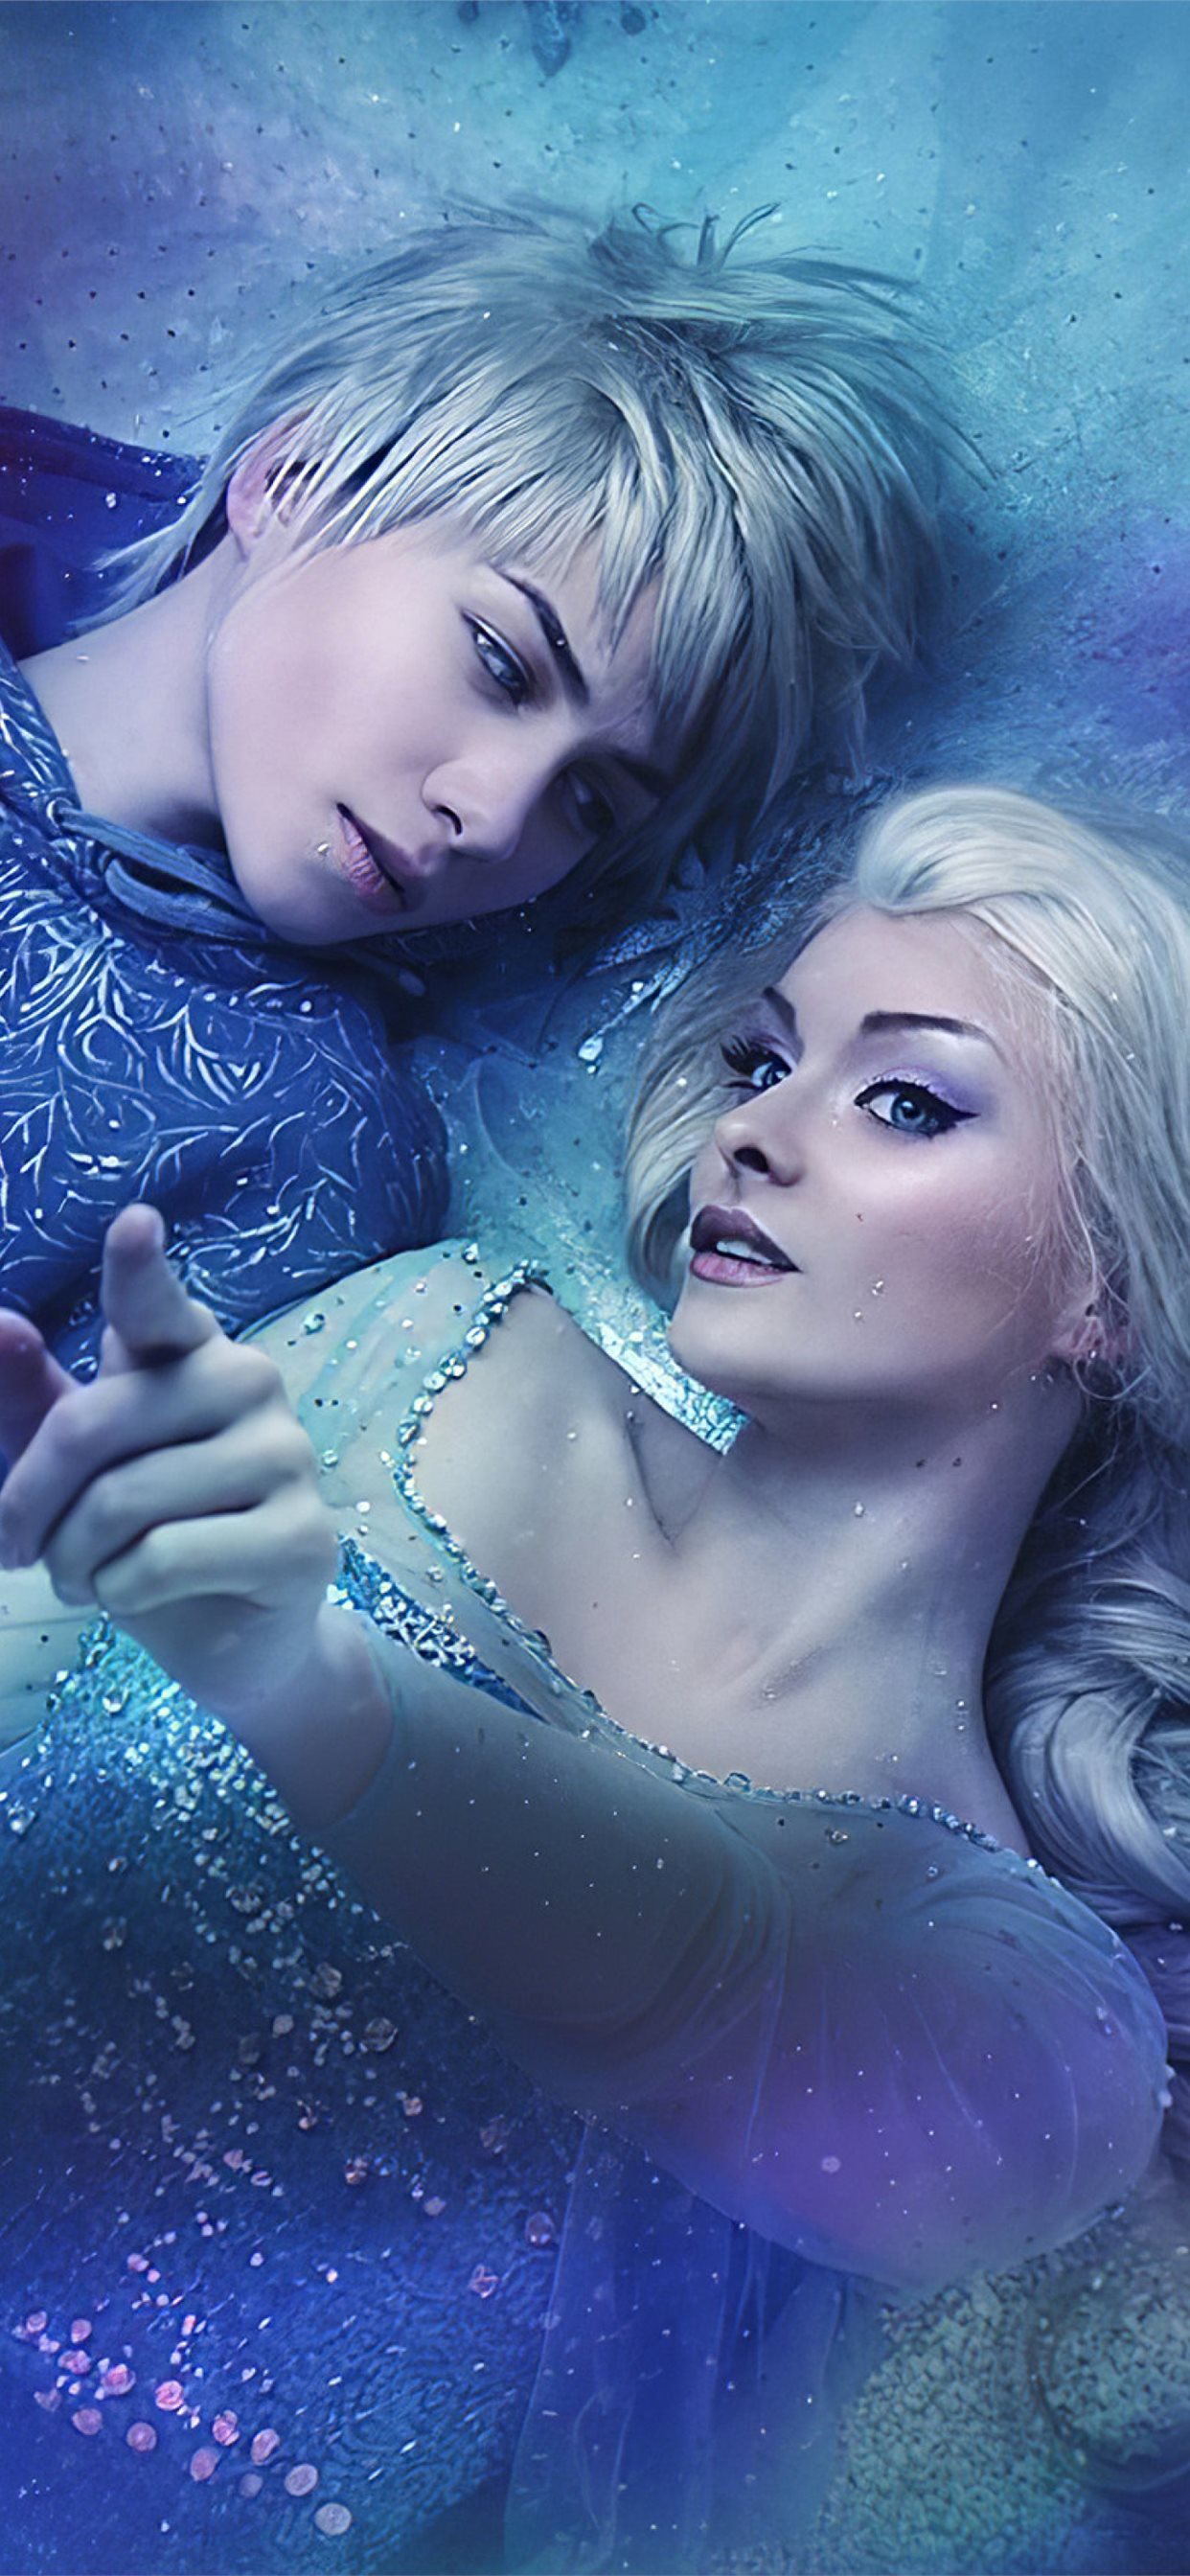 Elsa and jack frost iphone wallpapers free download